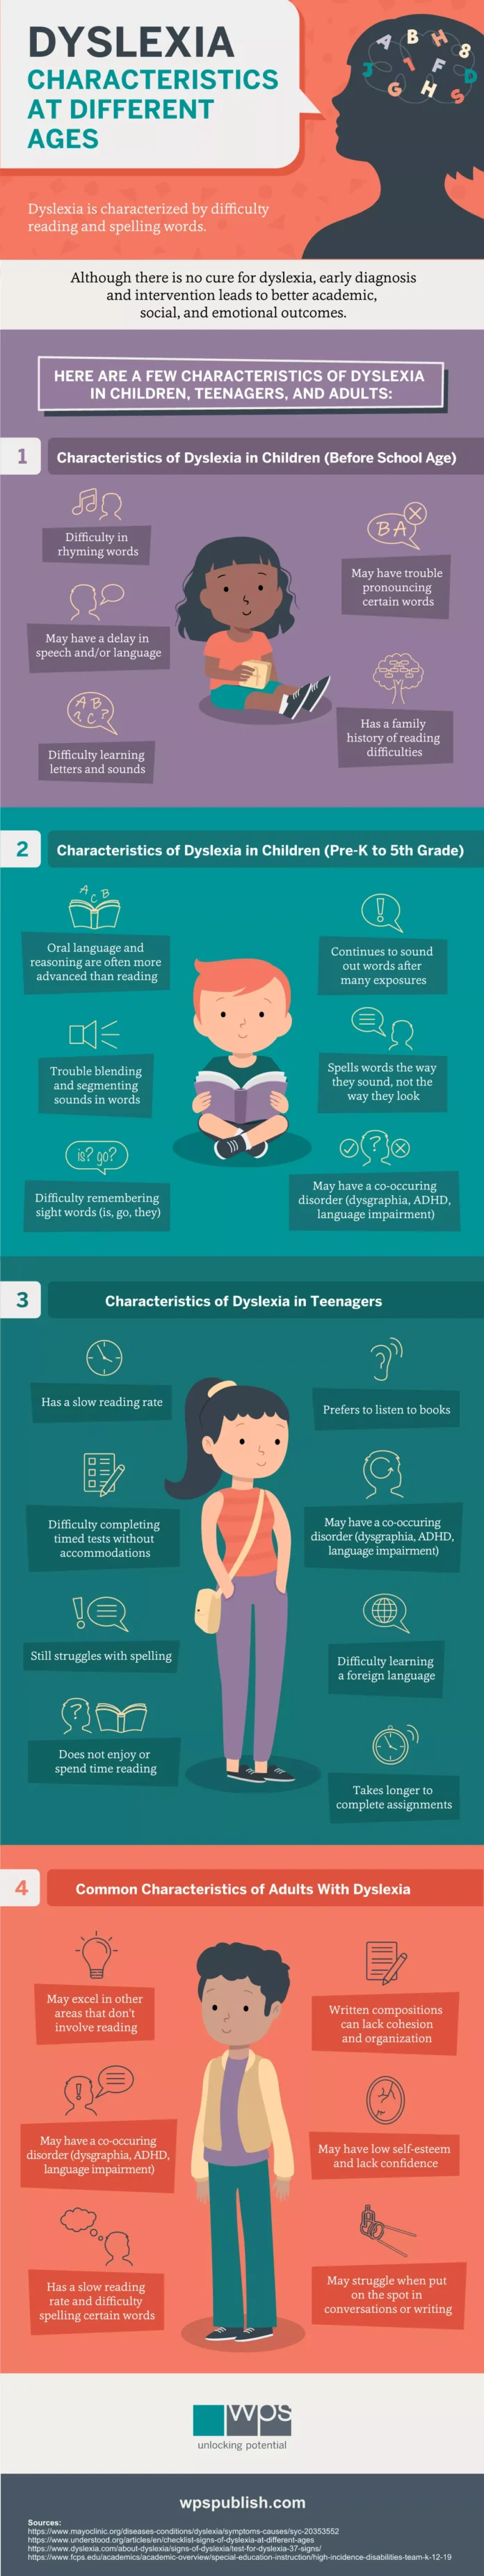 https://www.wpspublish.com/dyslexia-symptoms-to-look-for-when-testing-at-different-stages